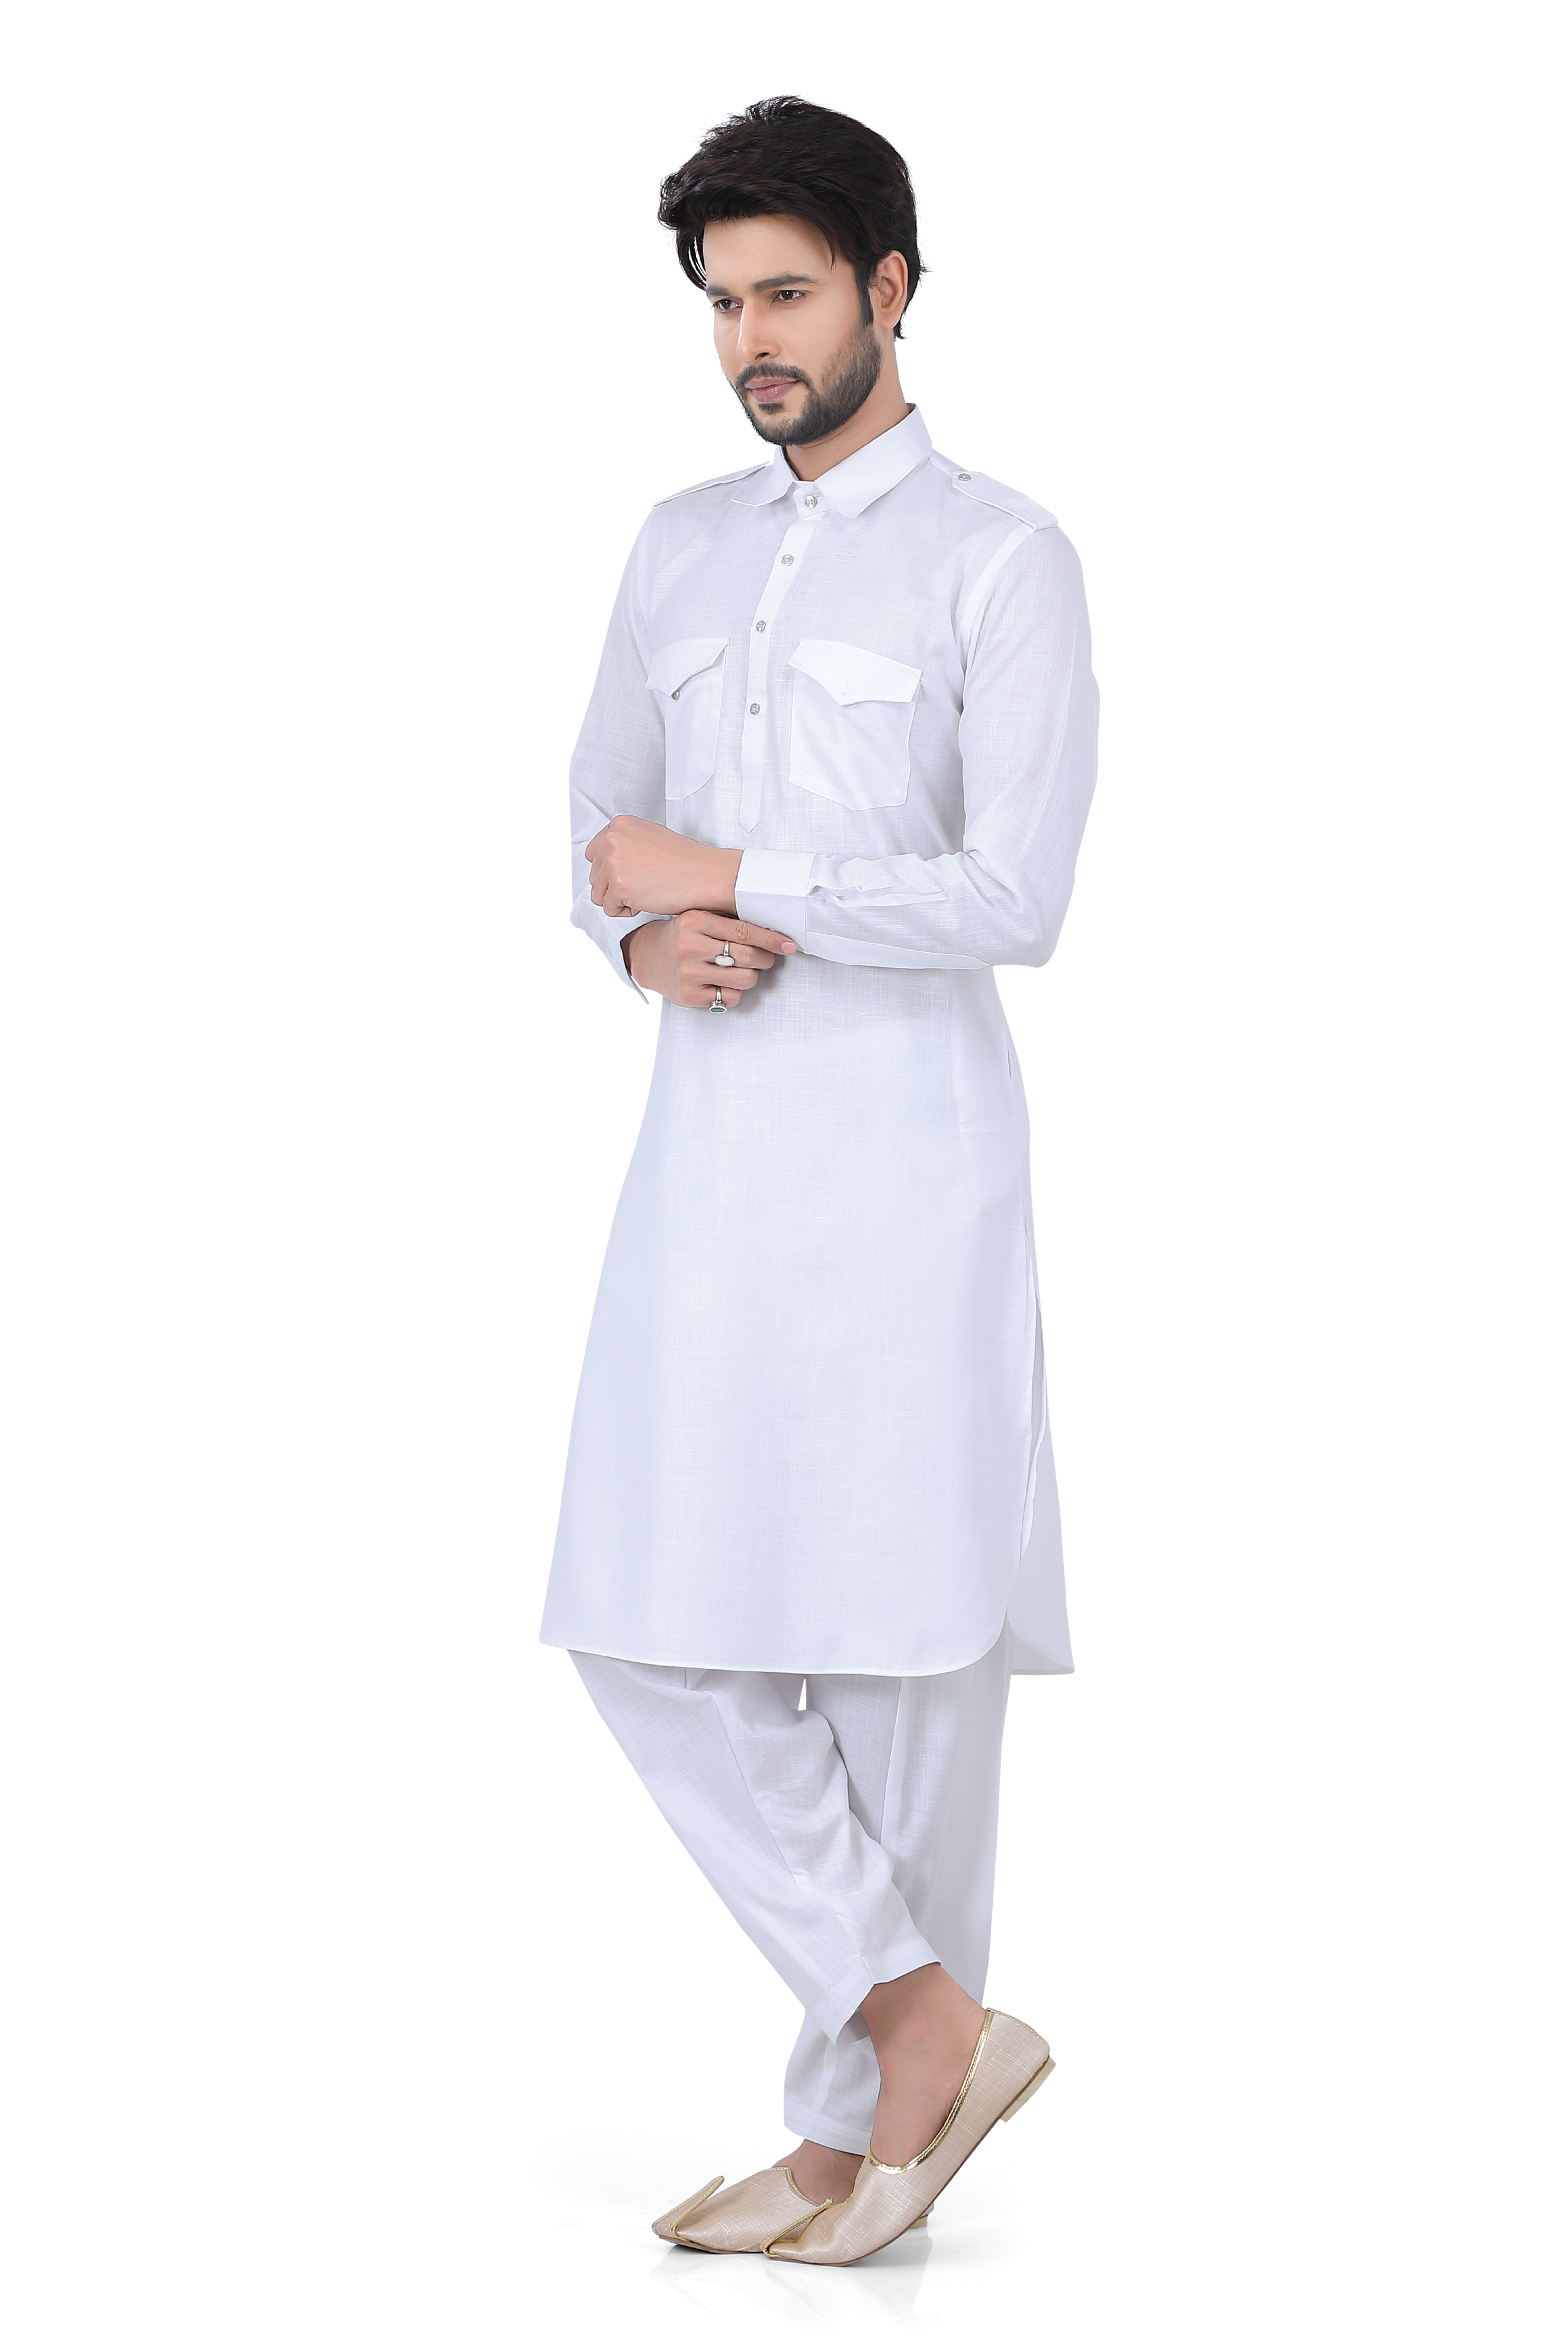 Readymade Cotton Pathani Suit in White Color - 11850